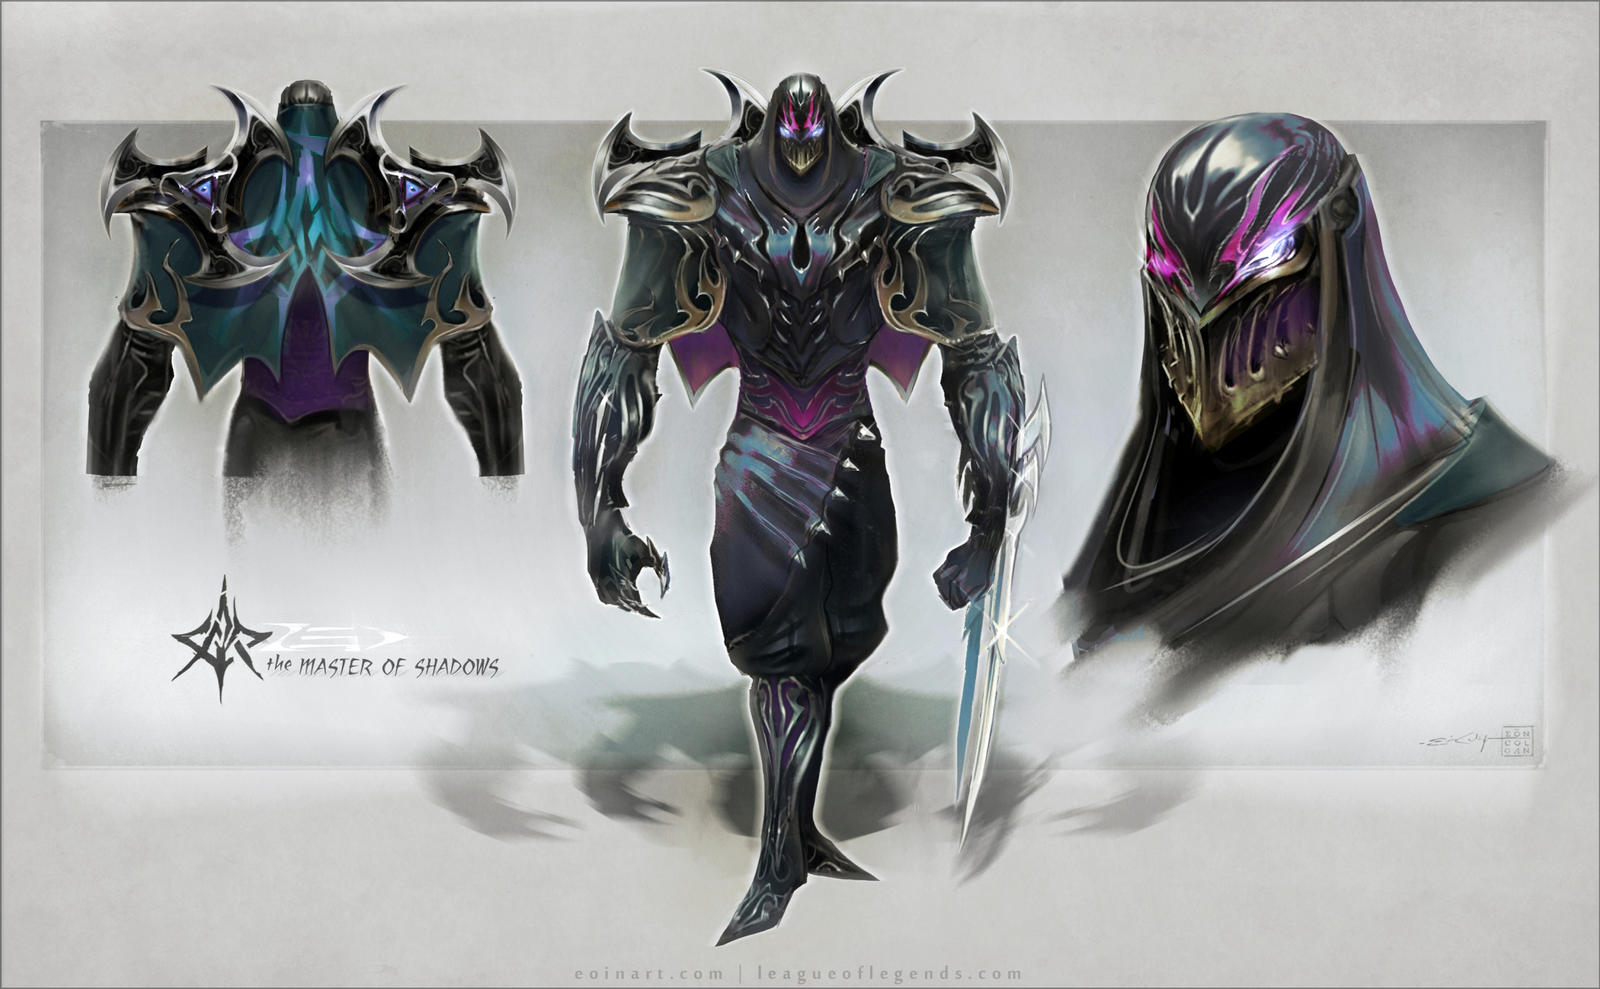 zed__the_master_of_shadows_by_eoinart-d5mla89.jpg